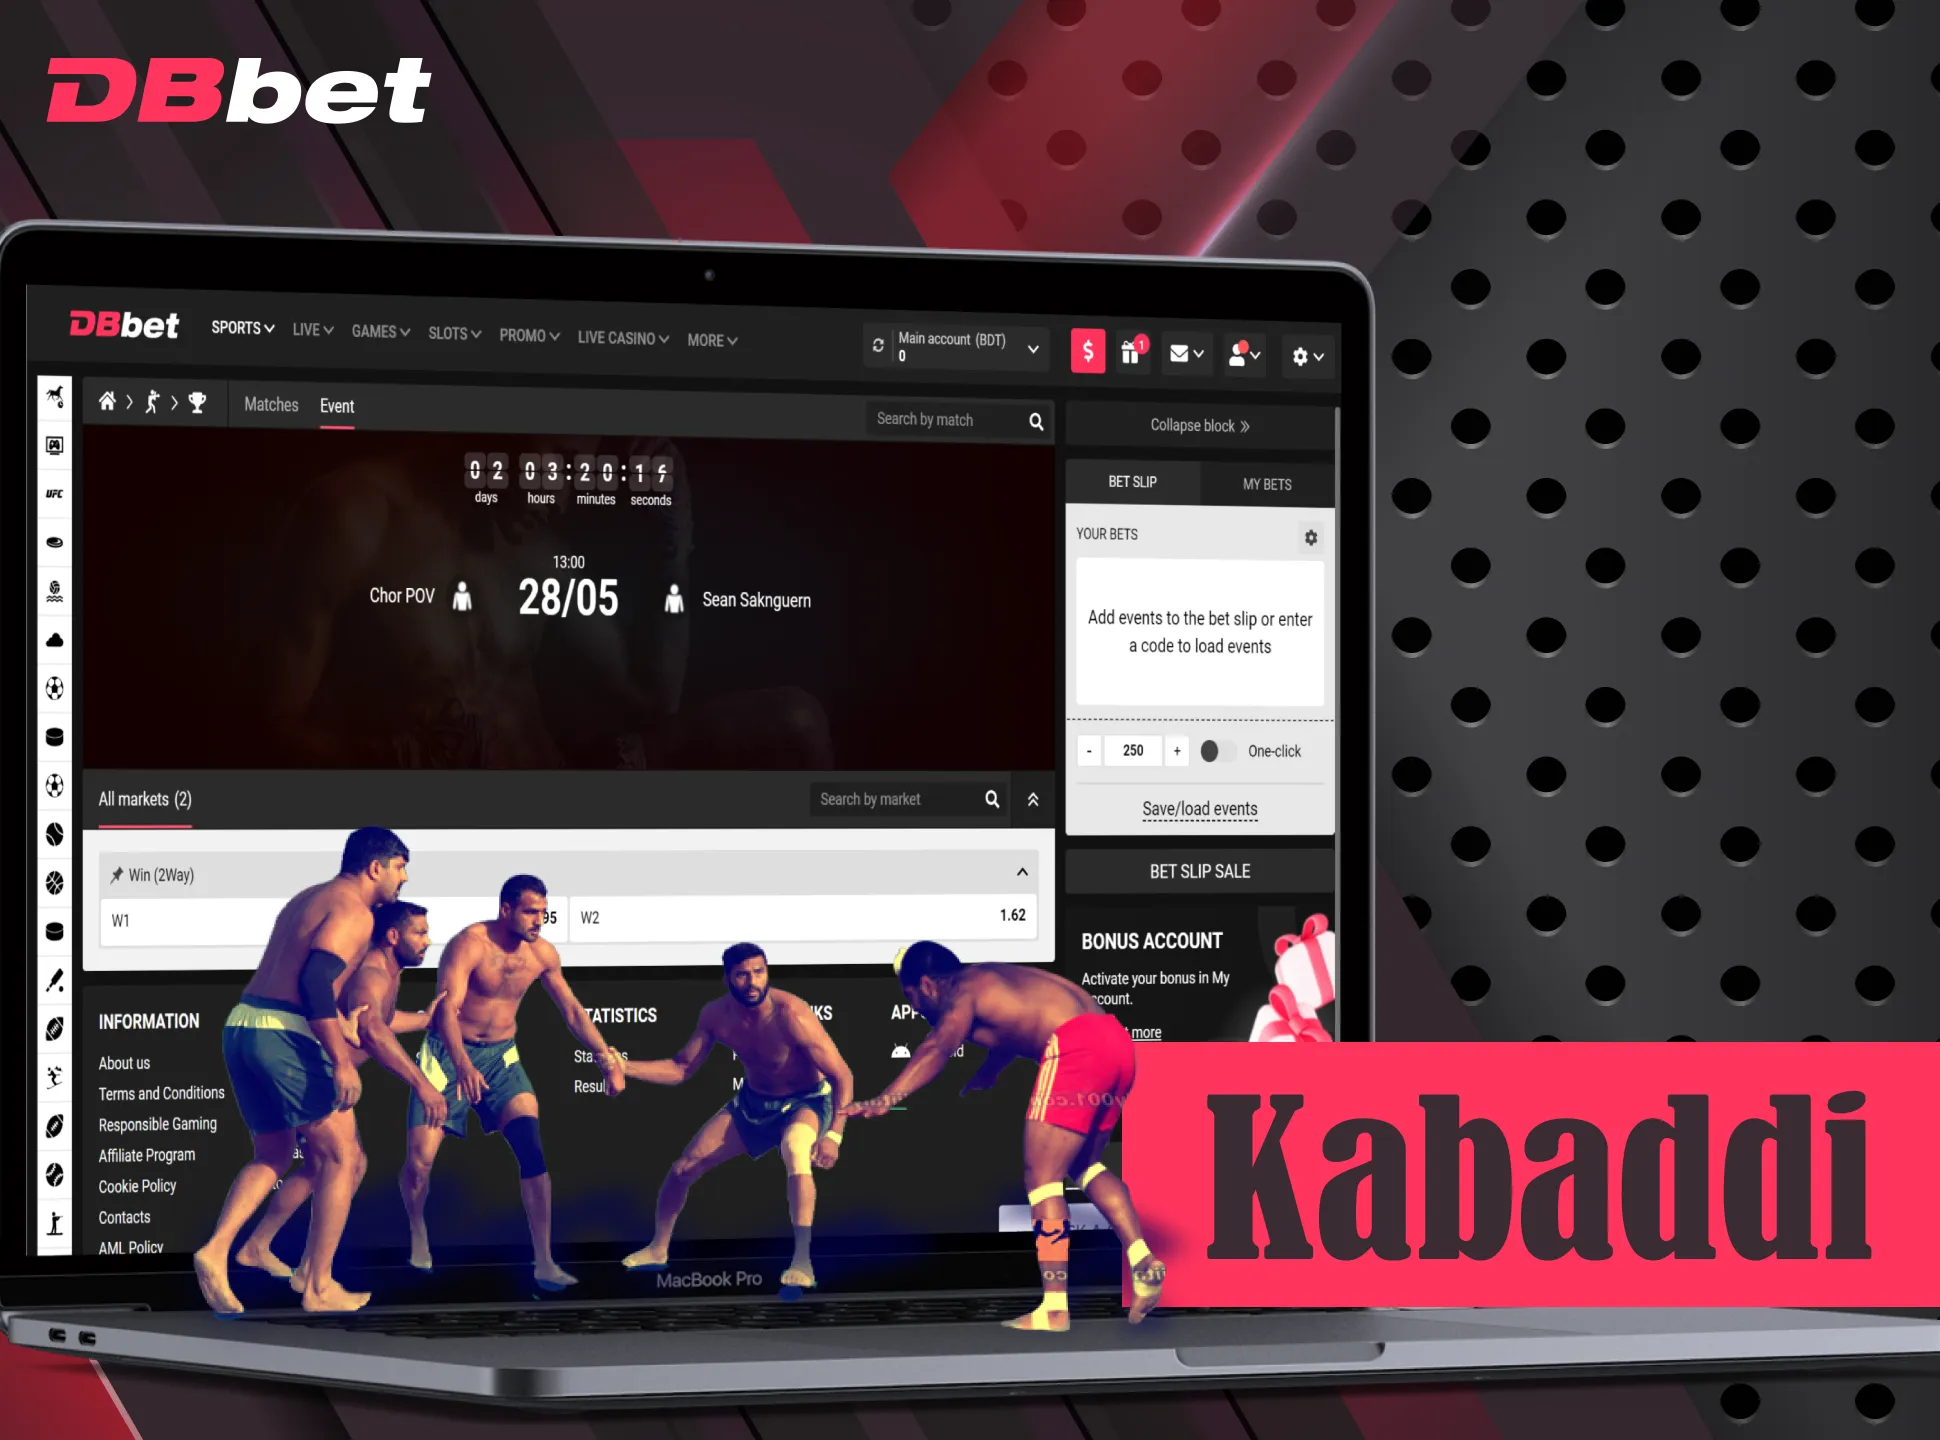 Kabaddi is a great sport for betting on at DBbet.